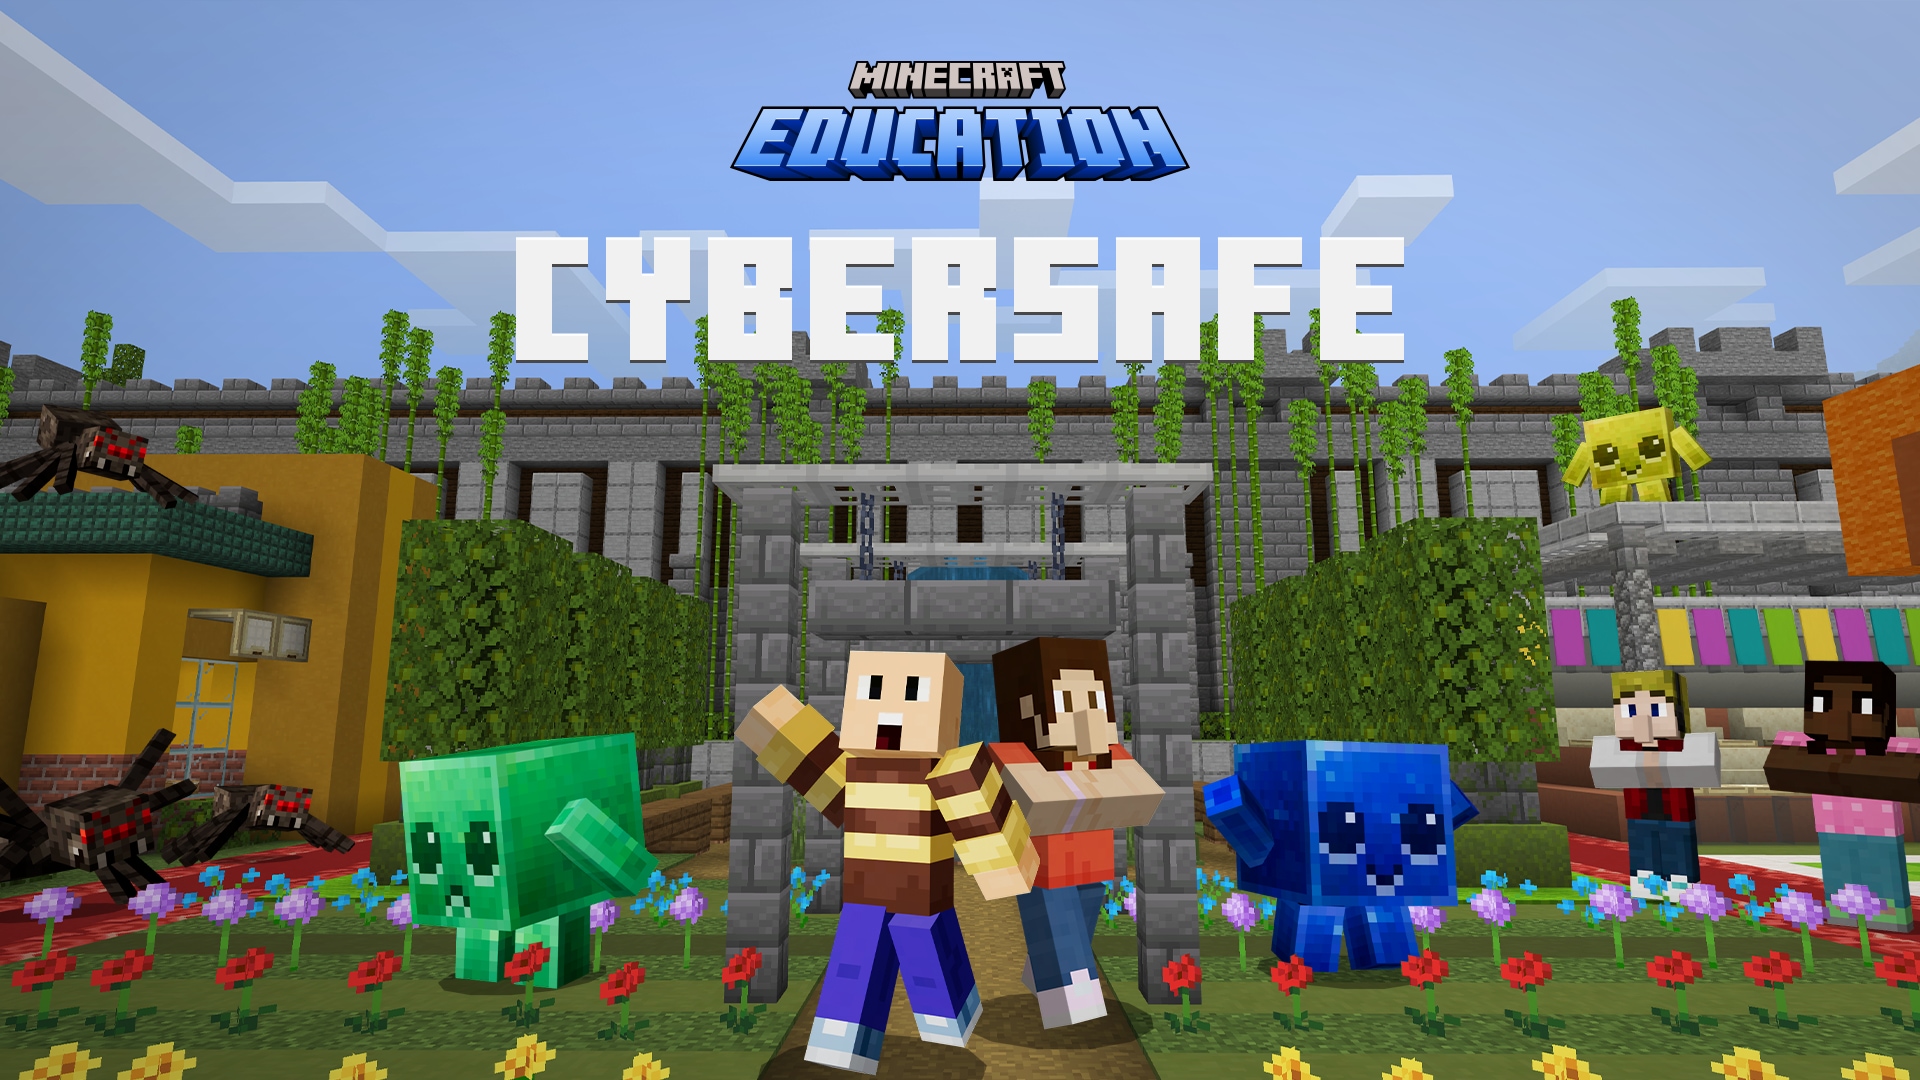 Minecraft people and data byte characters walk through a walled garden below the image caption: Cyber Safe.